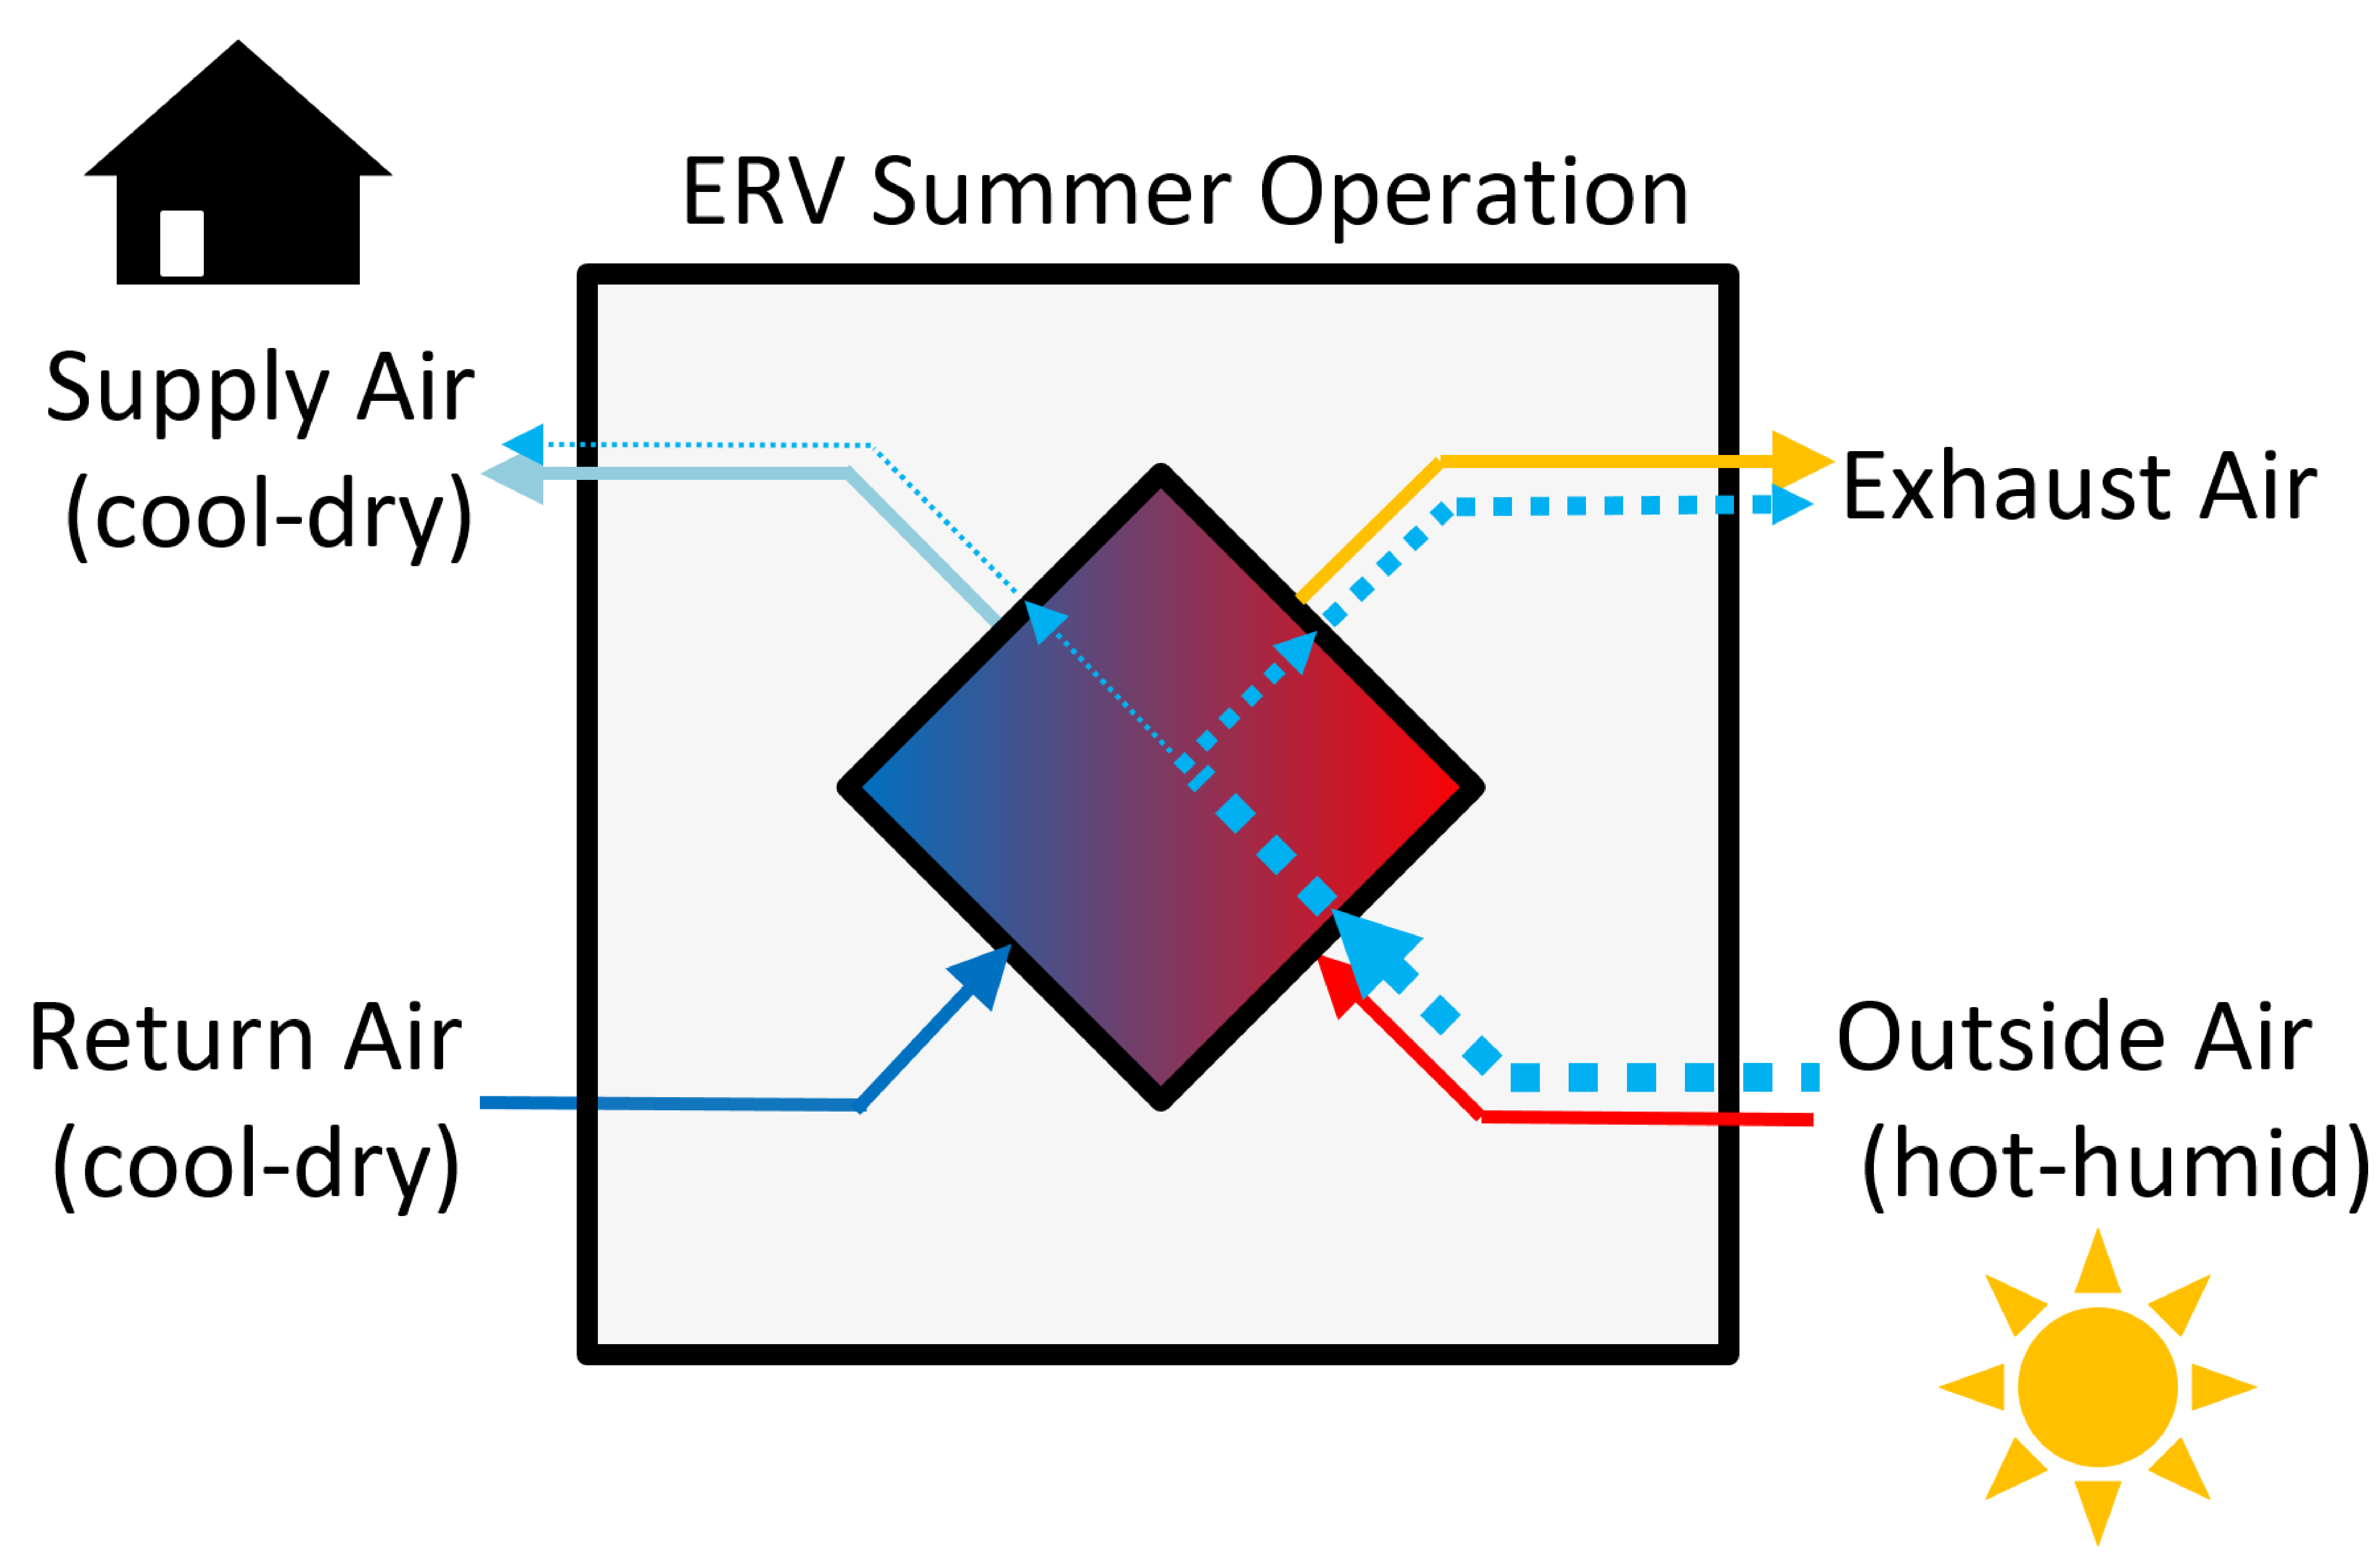 Image of ERV operating in summer months